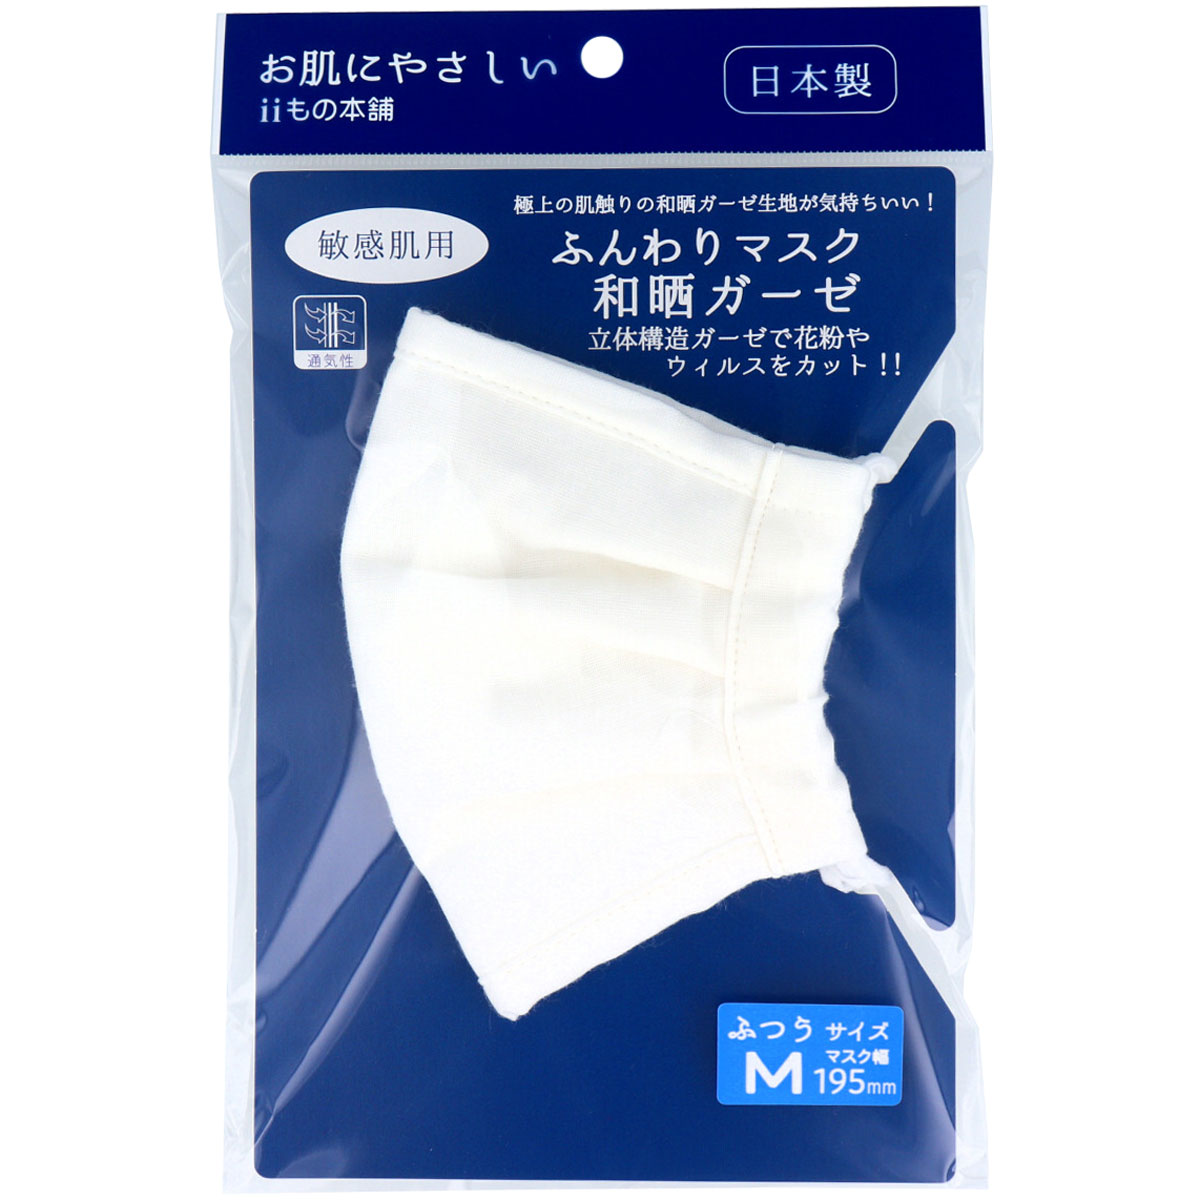 Picture of White color Fluffy Mask Using Bleached Gauze Medium size